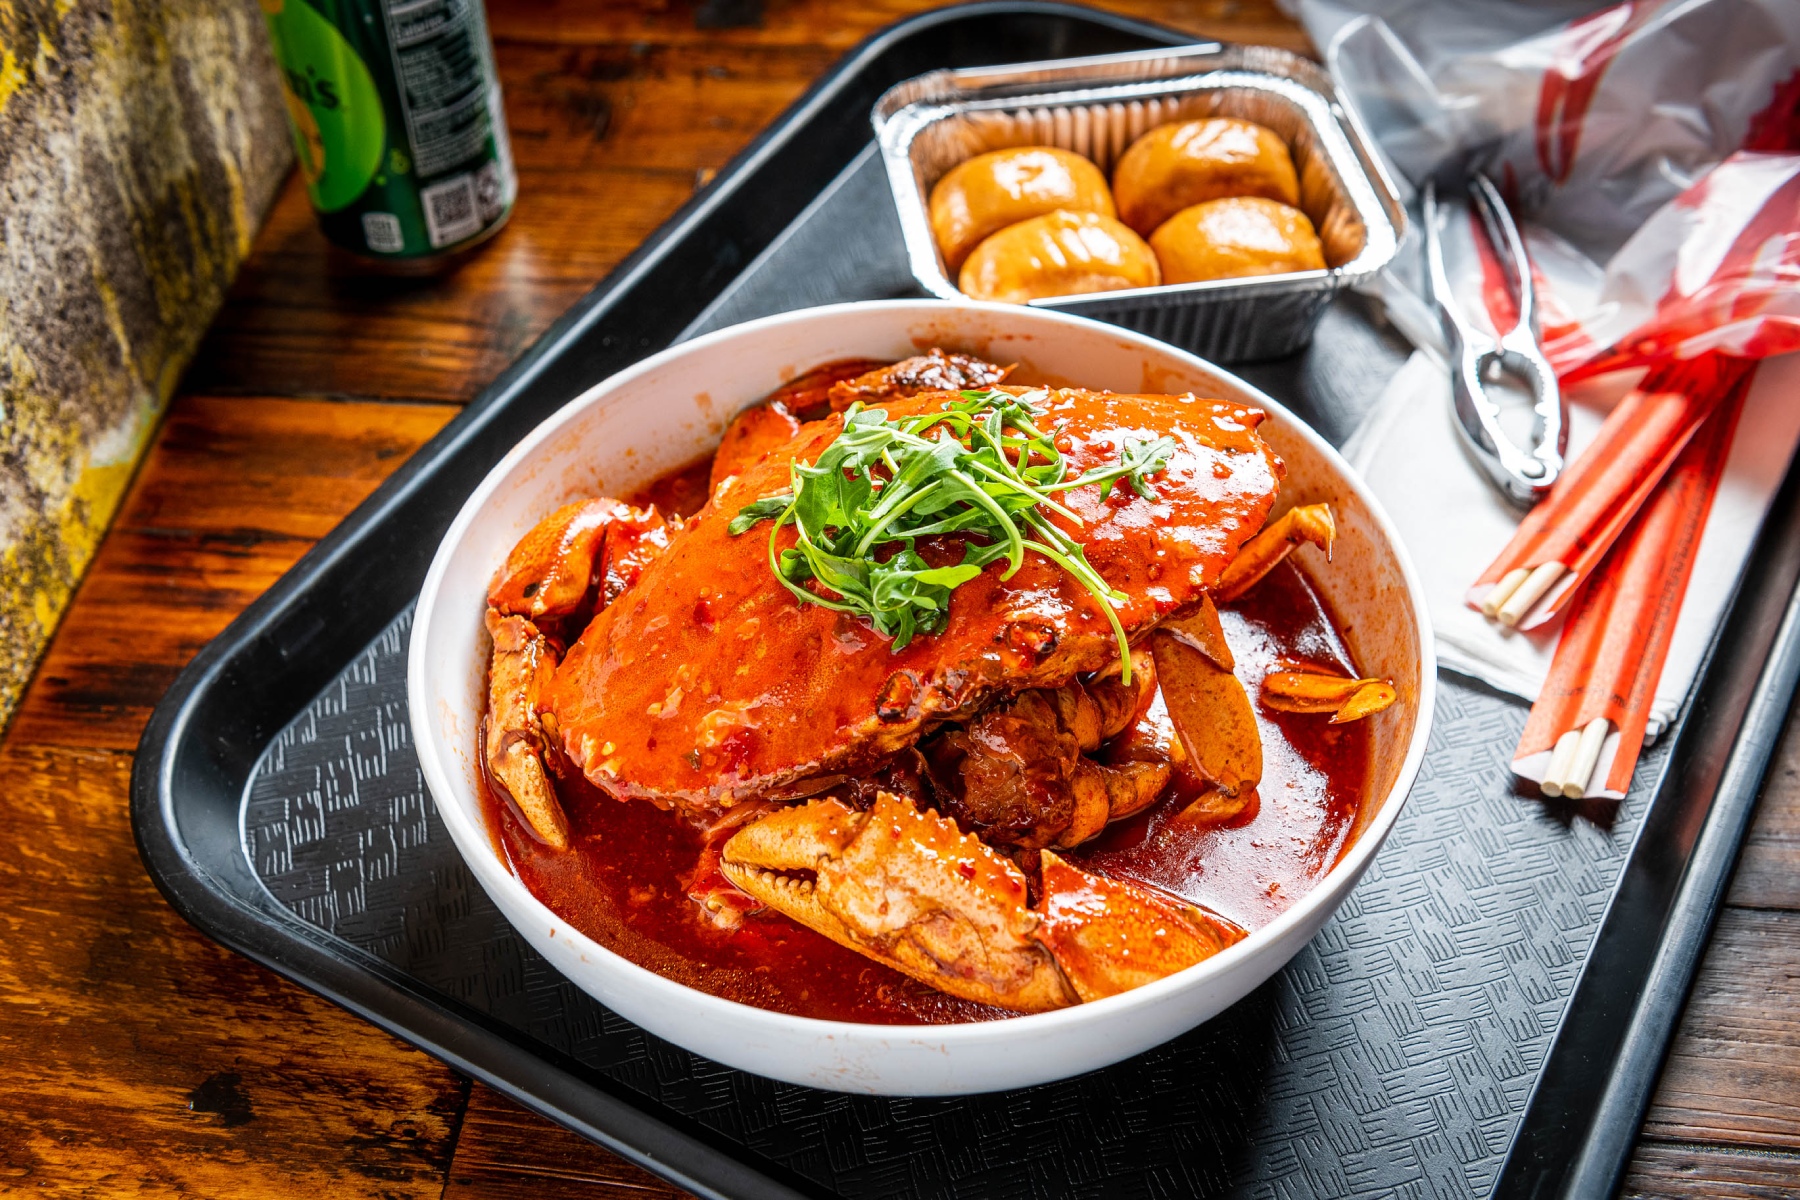 Chili crab in a plate on a serving tray with a side of steamed buns (mantou)